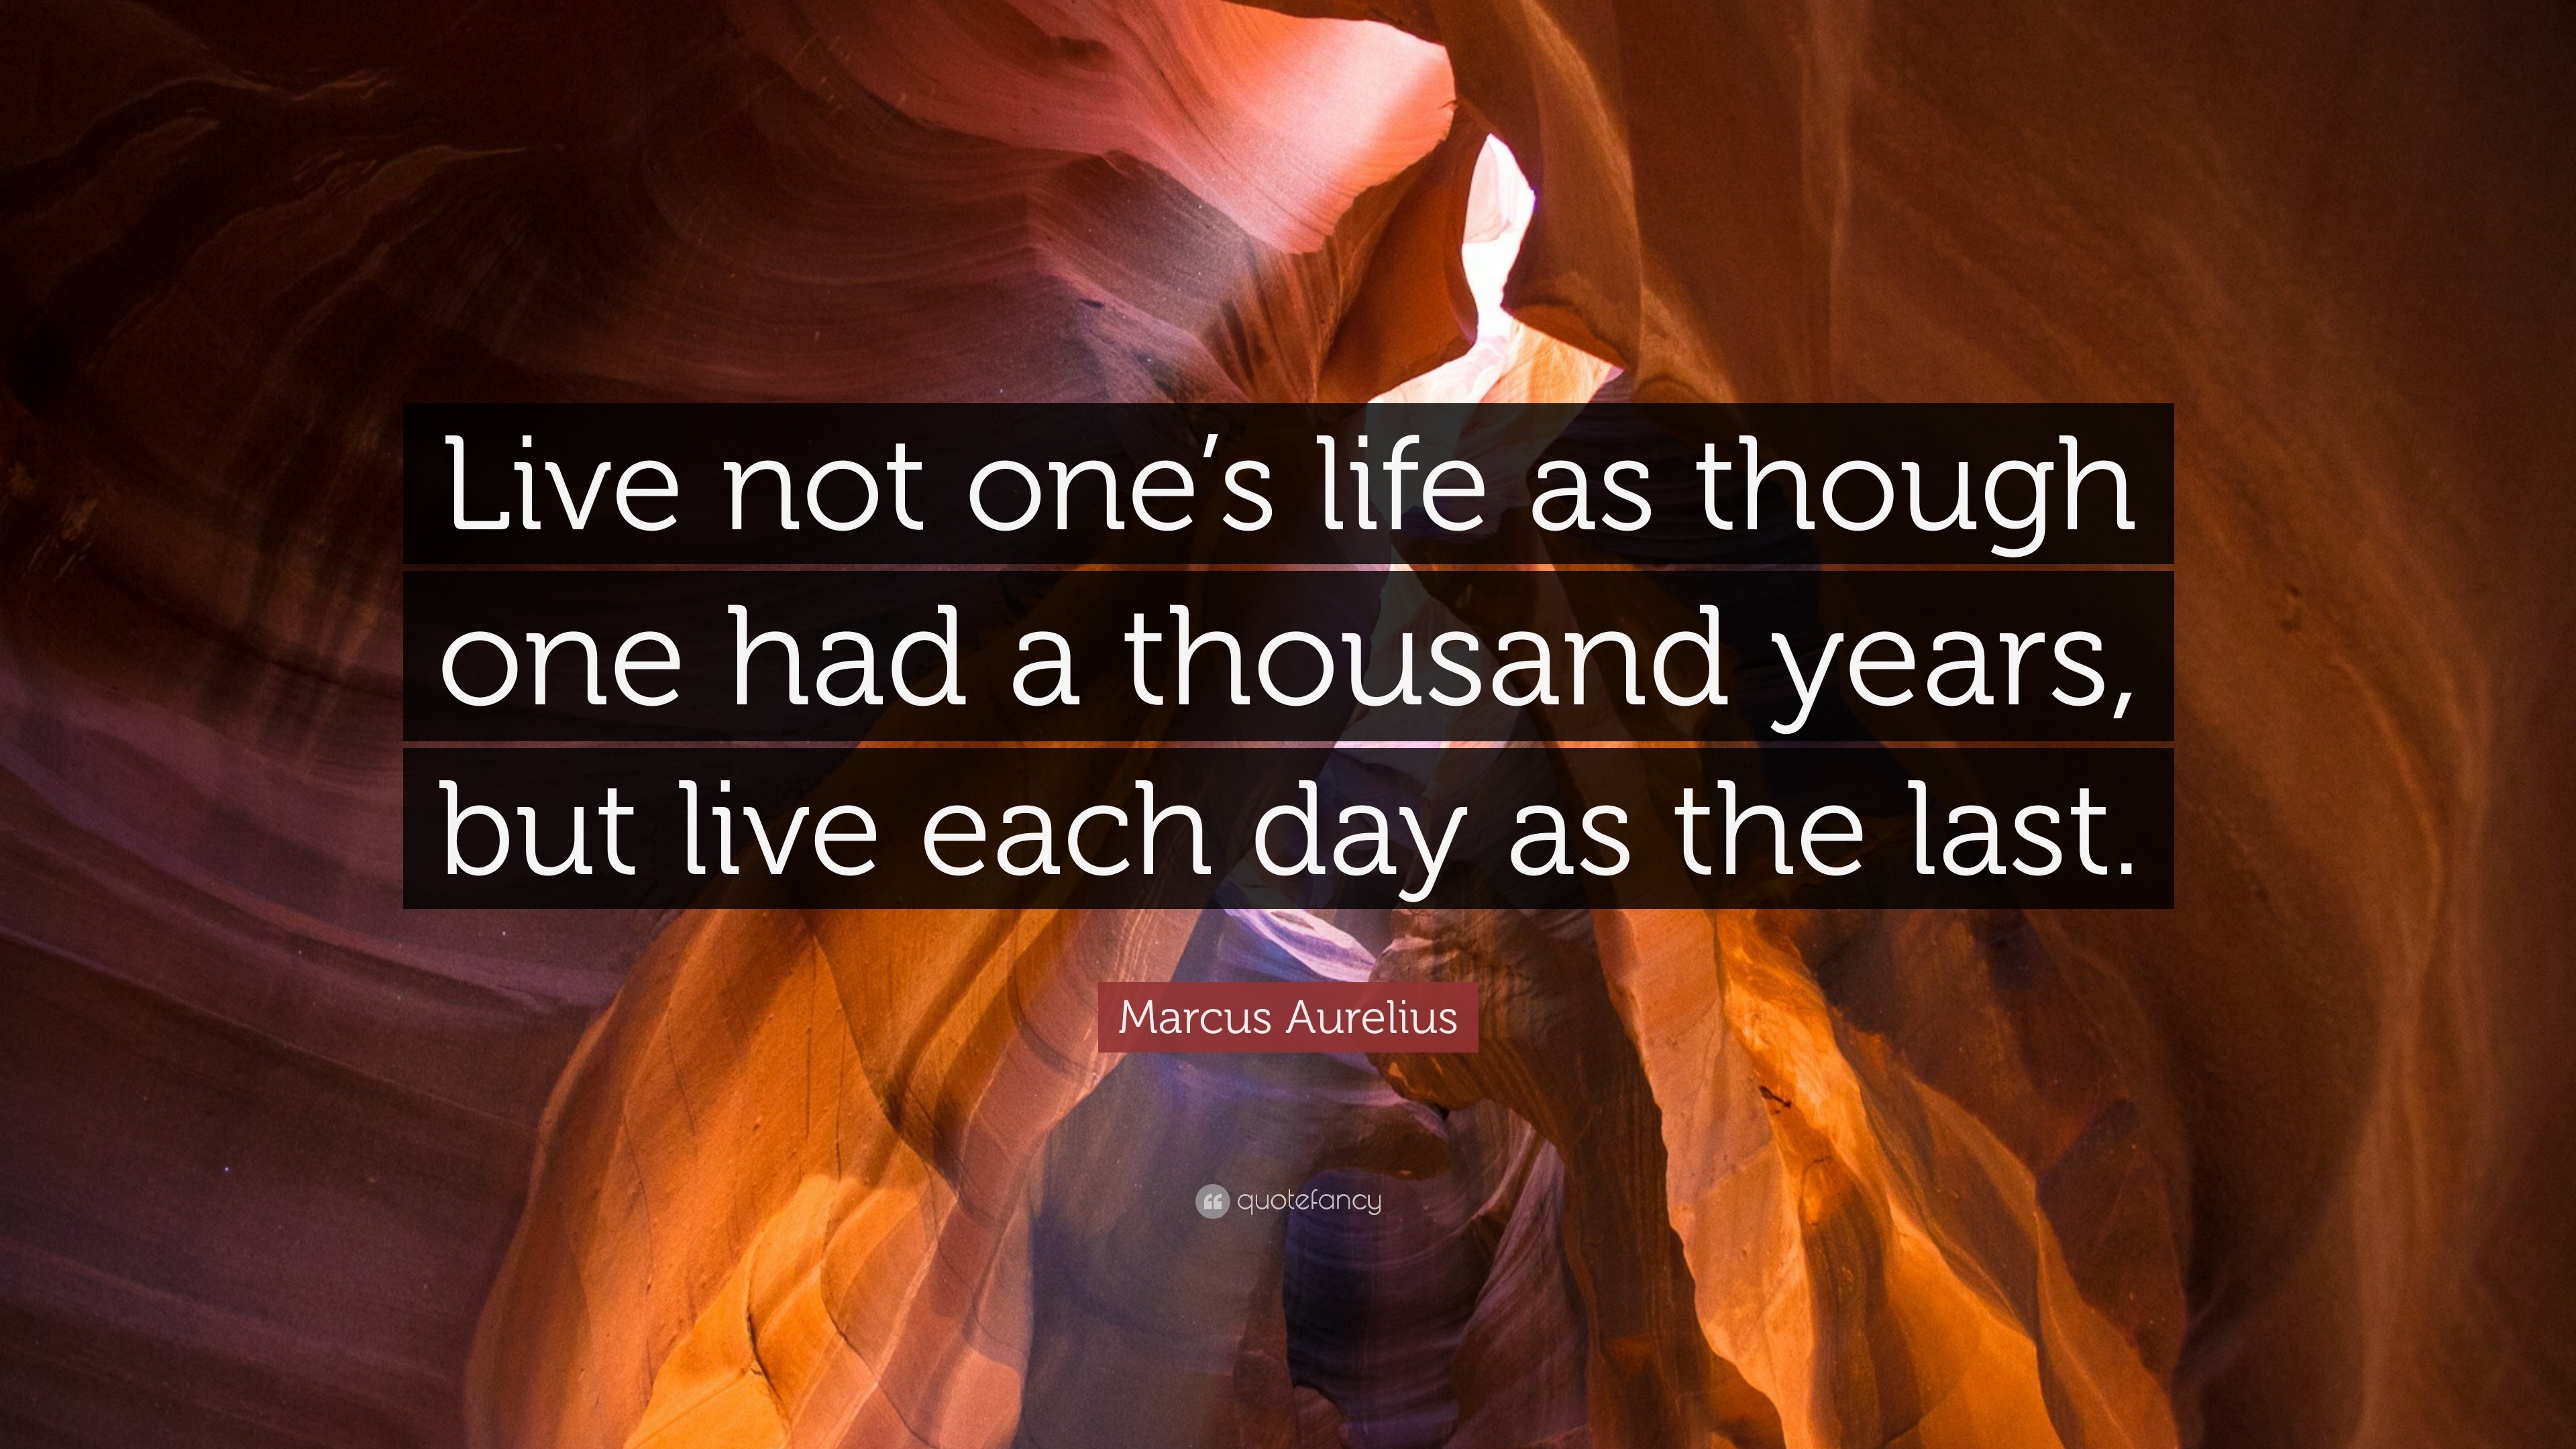 Marcus Aurelius Quote: “Live not one’s life as though one had a ...